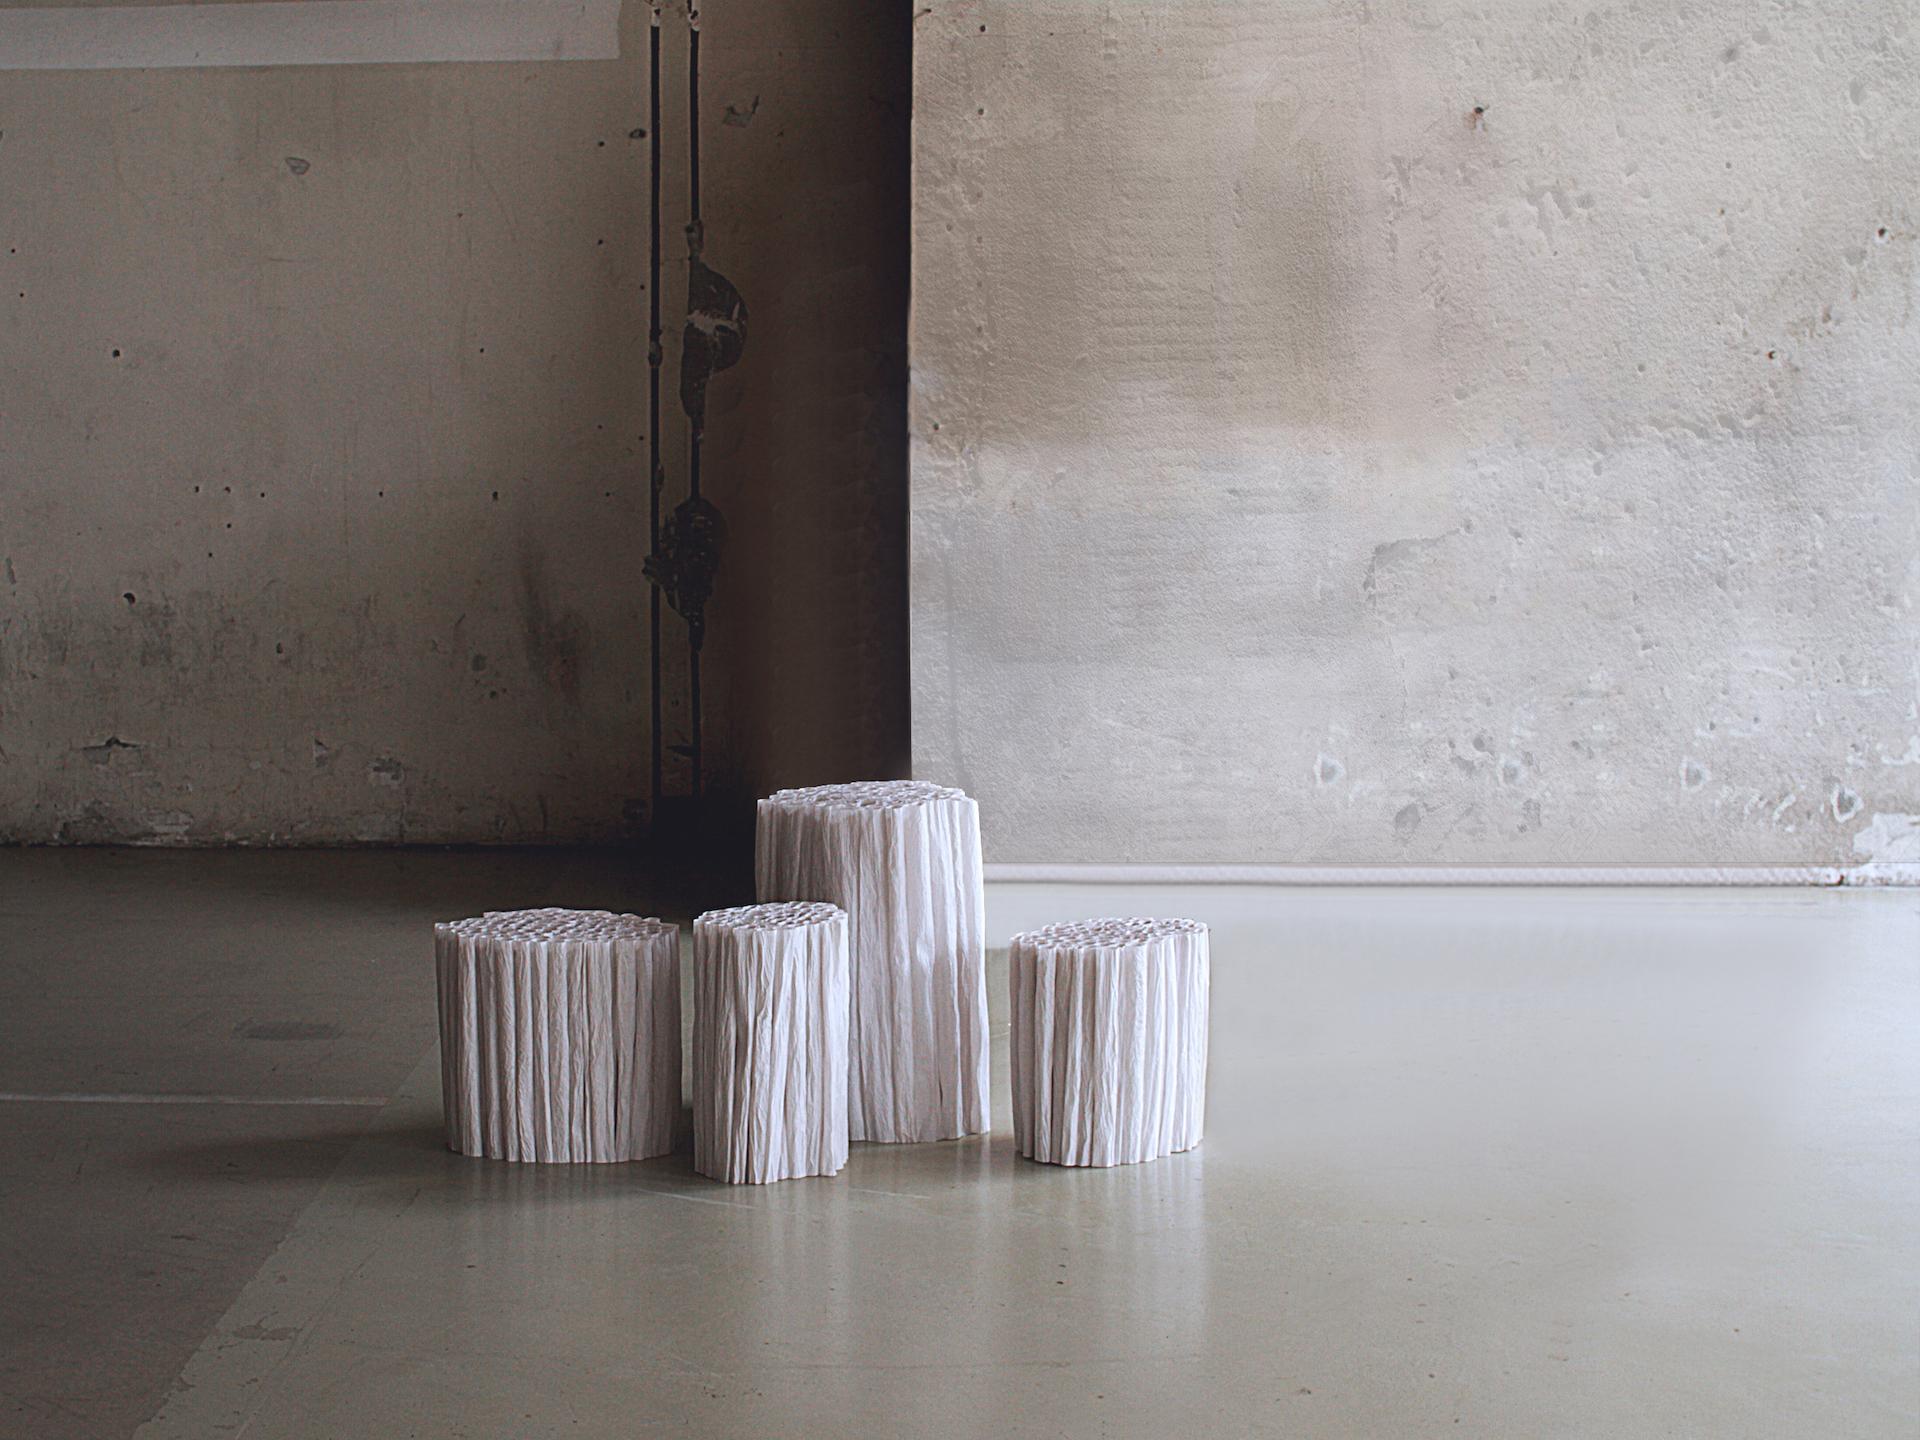 Taiwanese Designer Pao Hui Kao on Turning Raw Materials into Gallery-Worthy Furniture Pieces